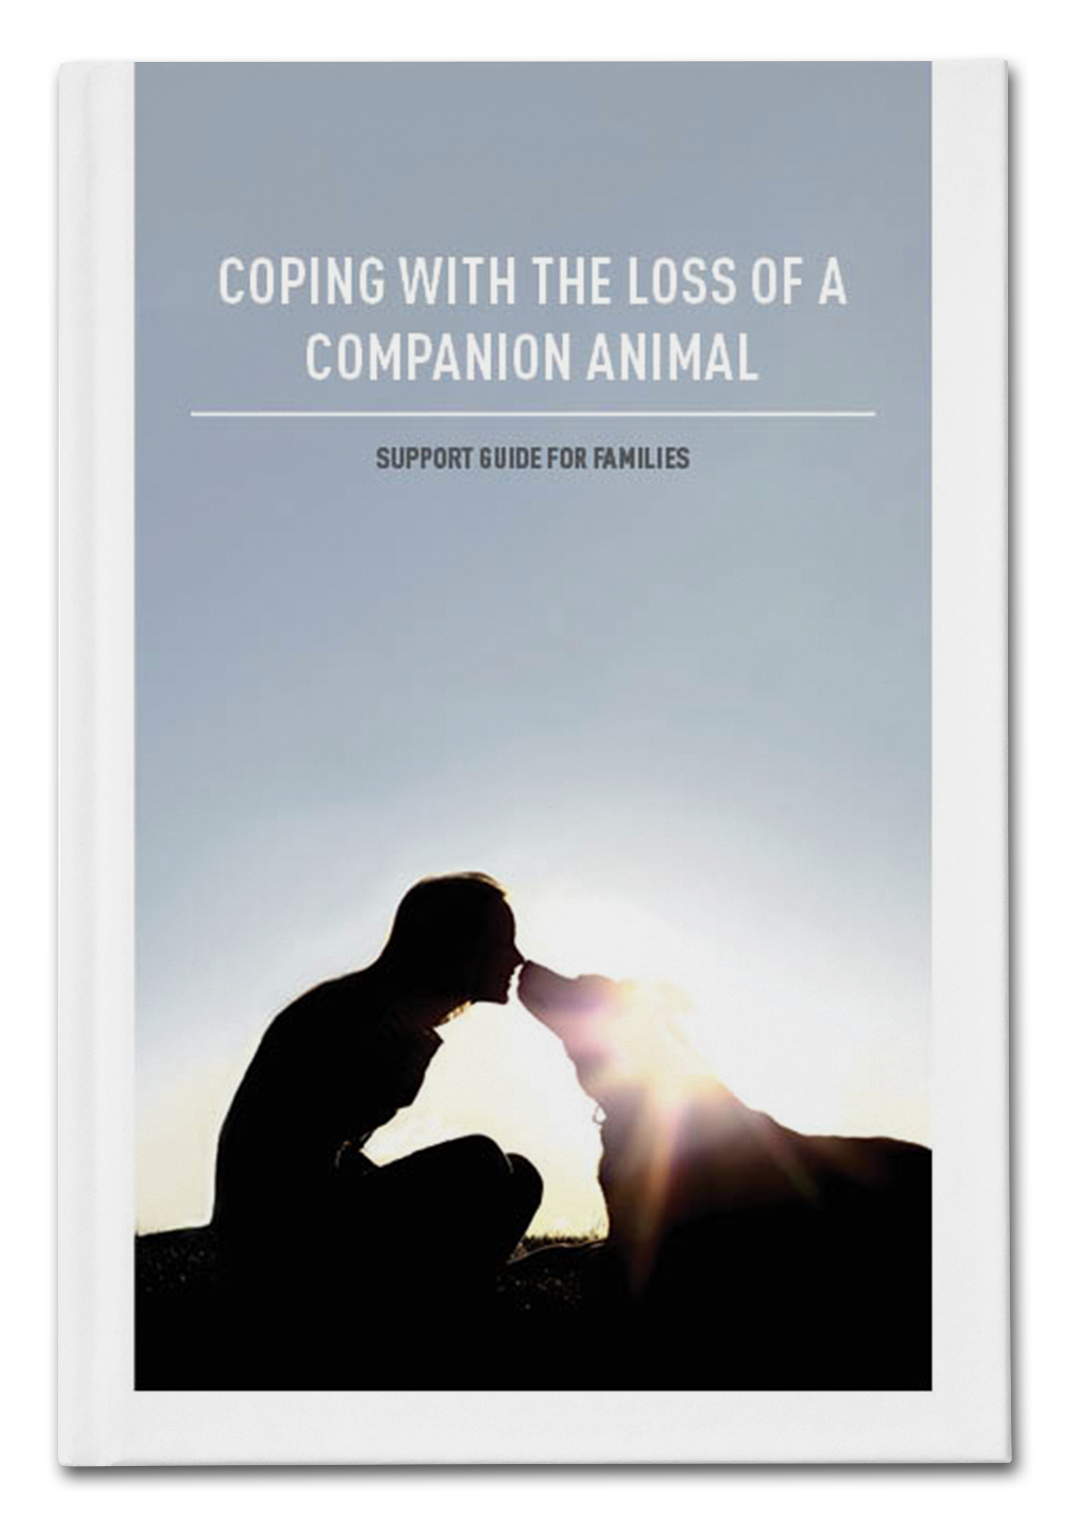 Grief Support Resource Book - Coping with the Loss of a Companion Animal - Link to Readable PDF